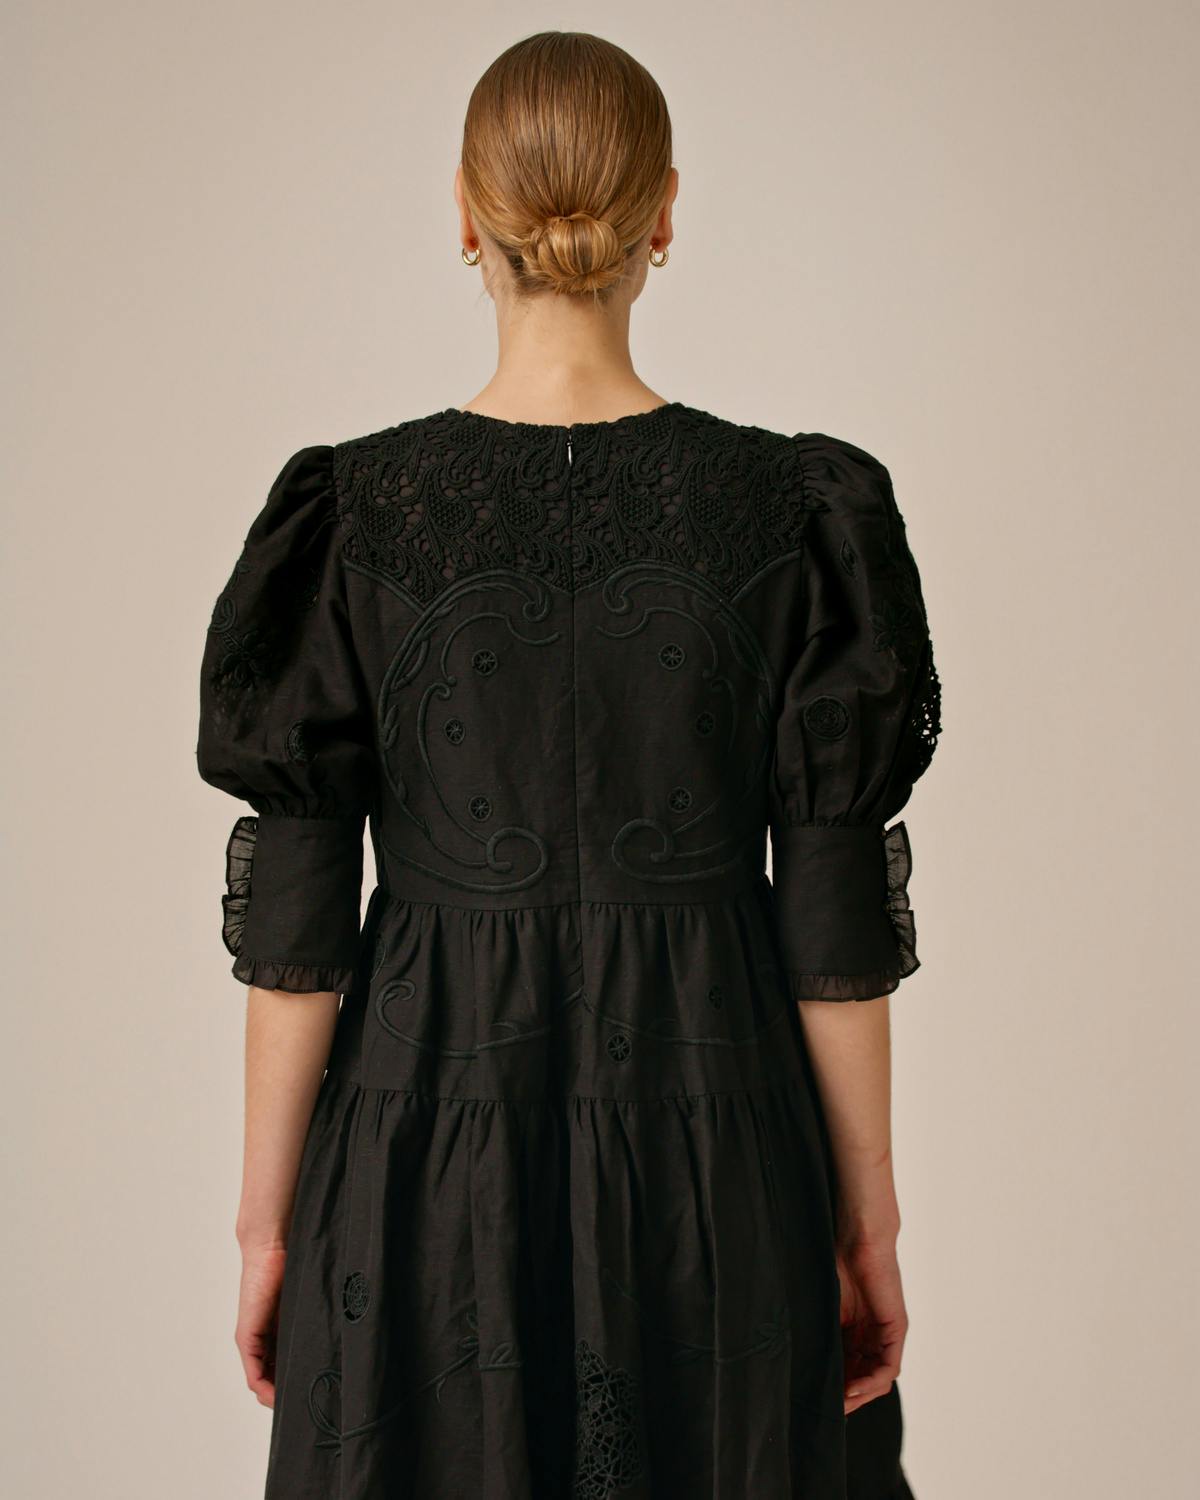 Linen Embroidery Gown, Black. Image #3